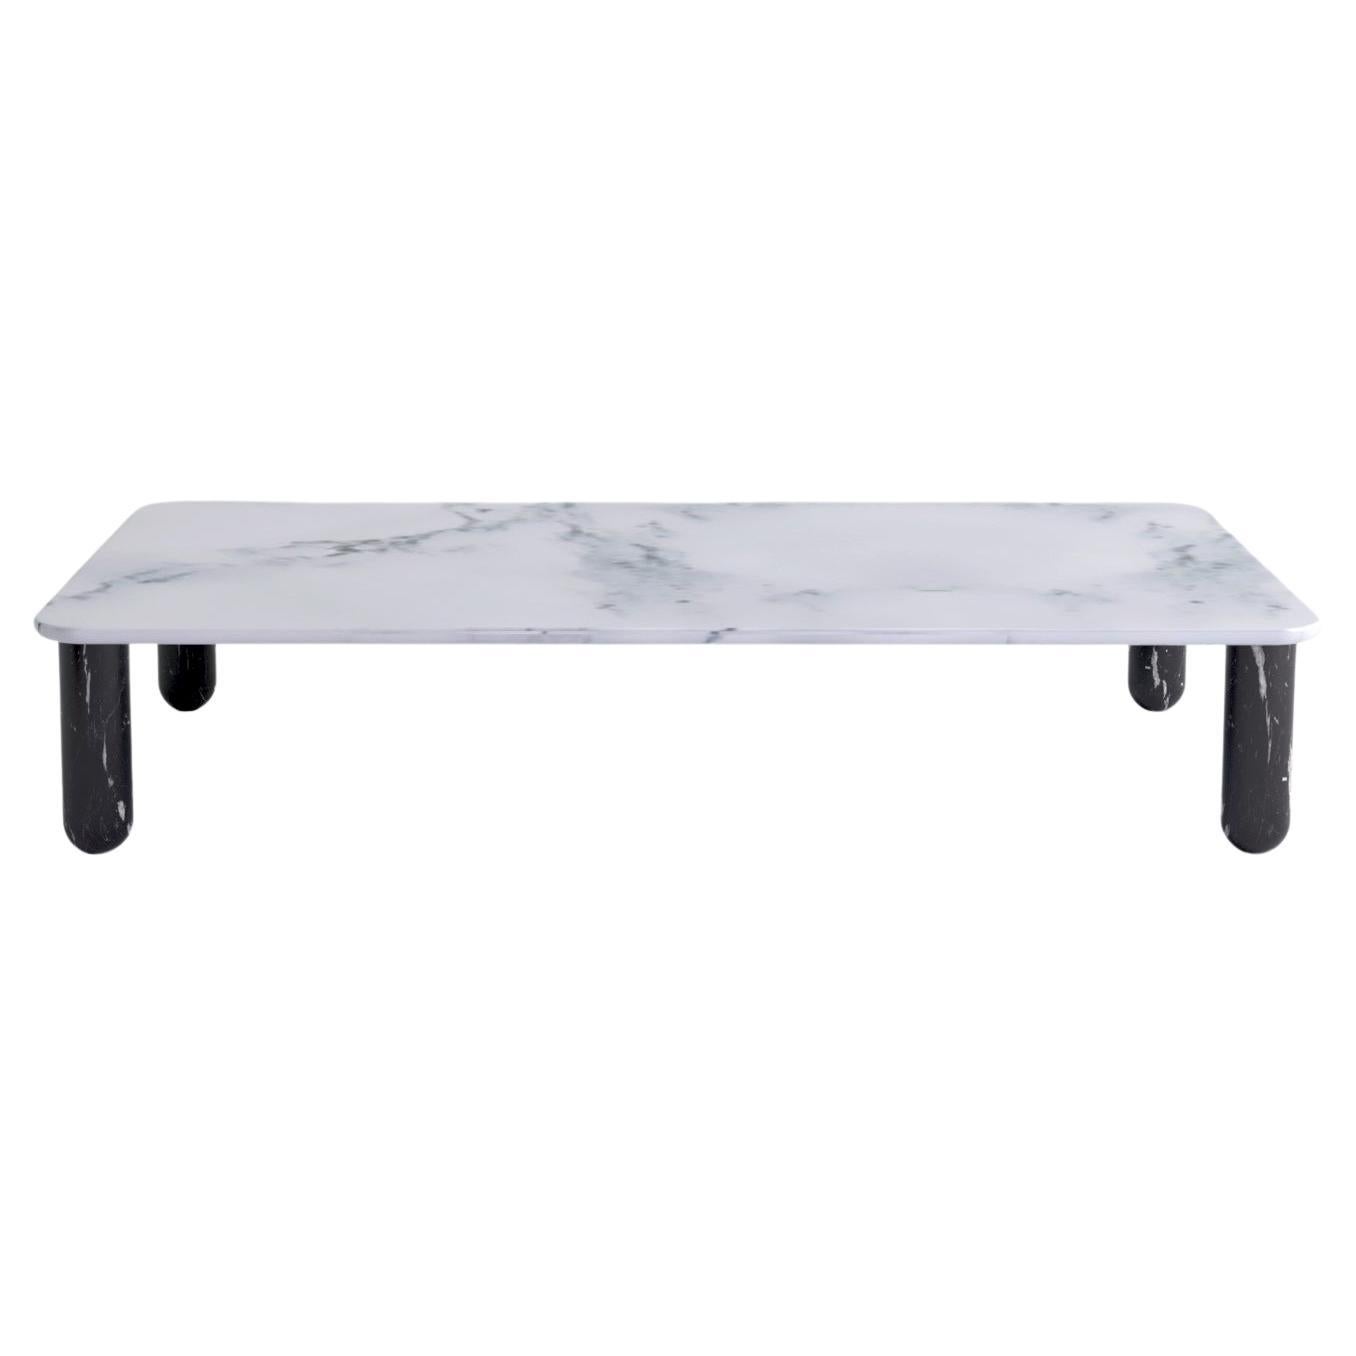 Xlarge White and Black Marble "Sunday" Coffee Table, Jean-Baptiste Souletie For Sale